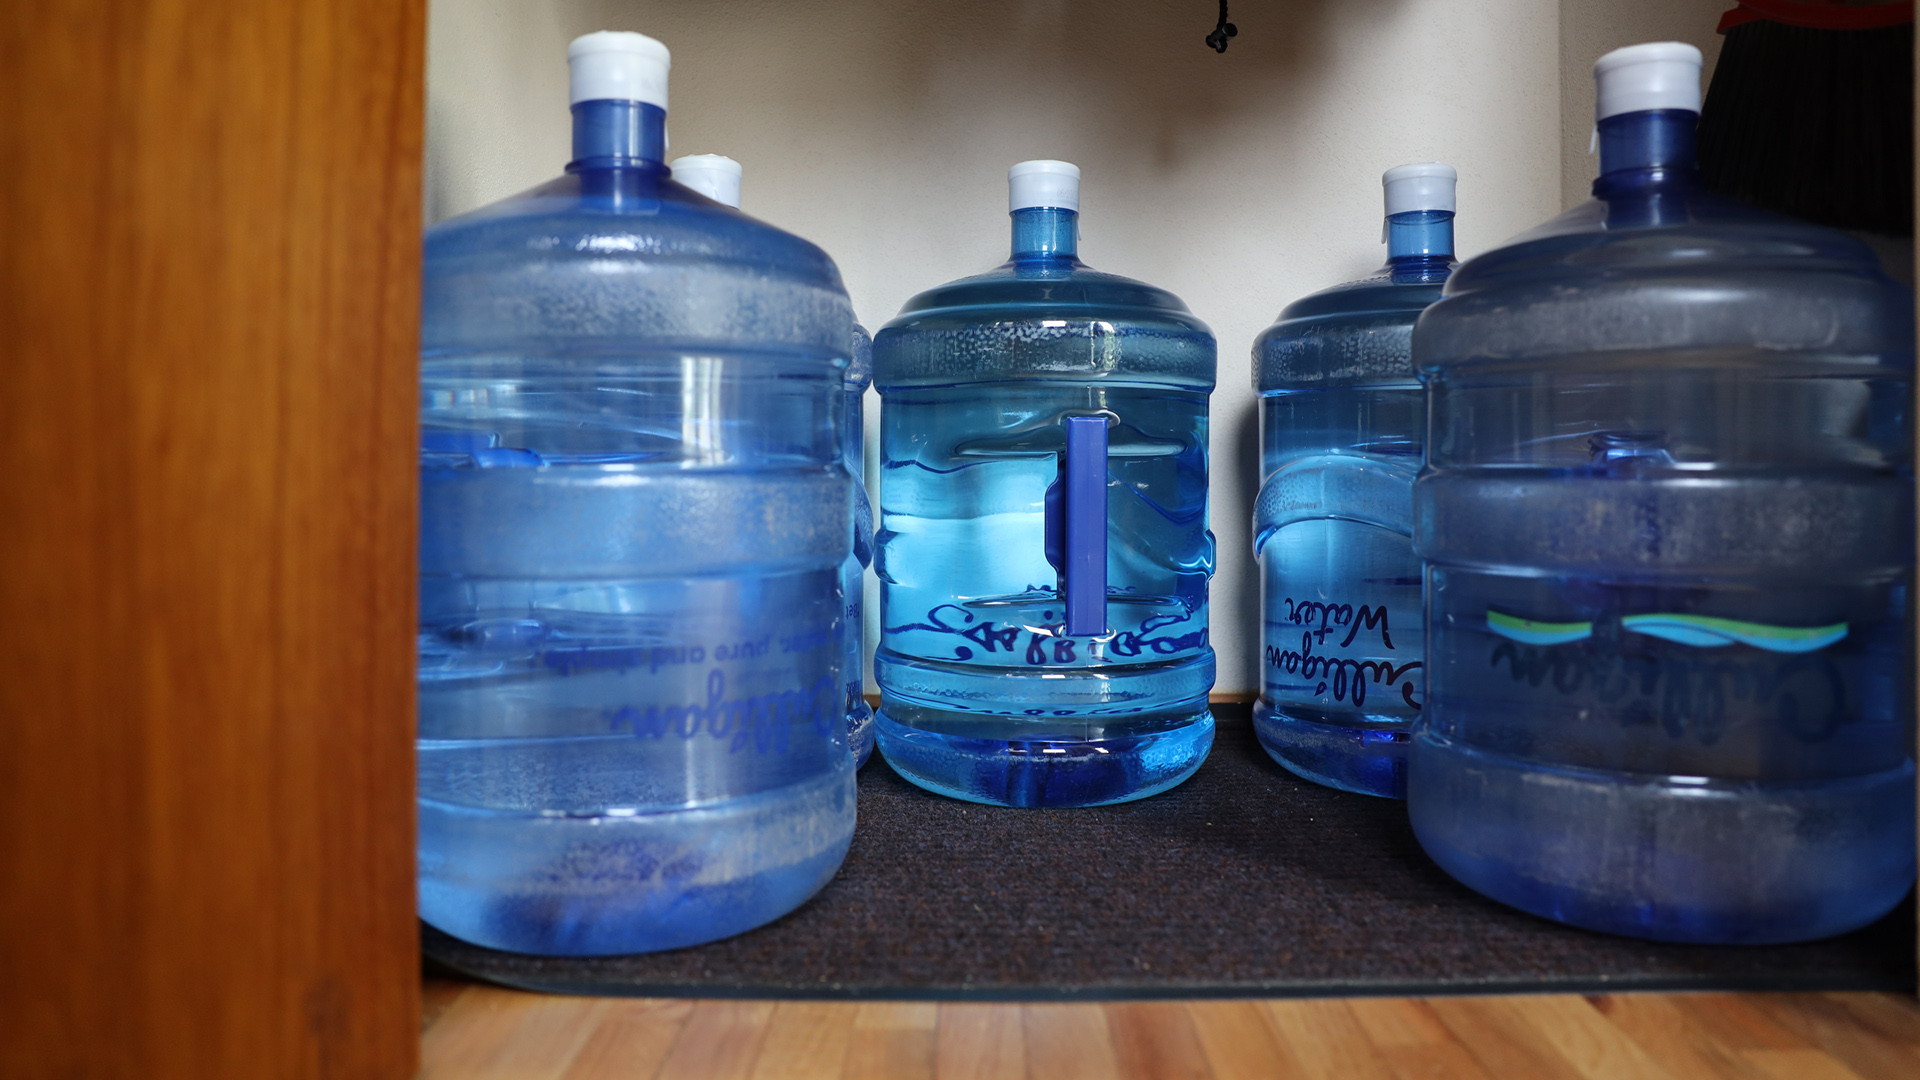 Four 5-gallon jugs of water sit at the base of a closet on a floor mat atop a wooden floor.